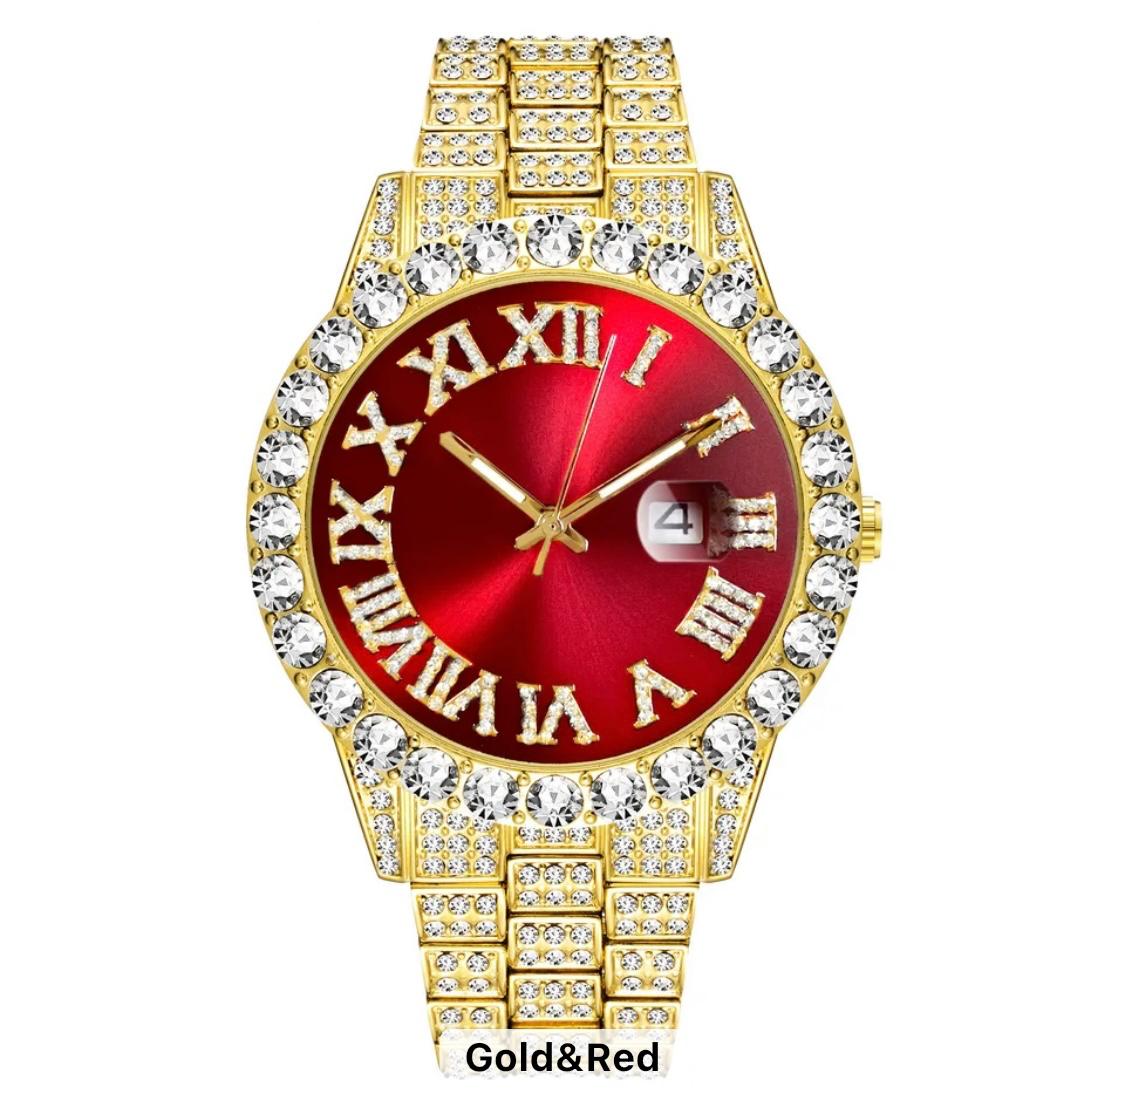 Icy Gold & Red Face Watch